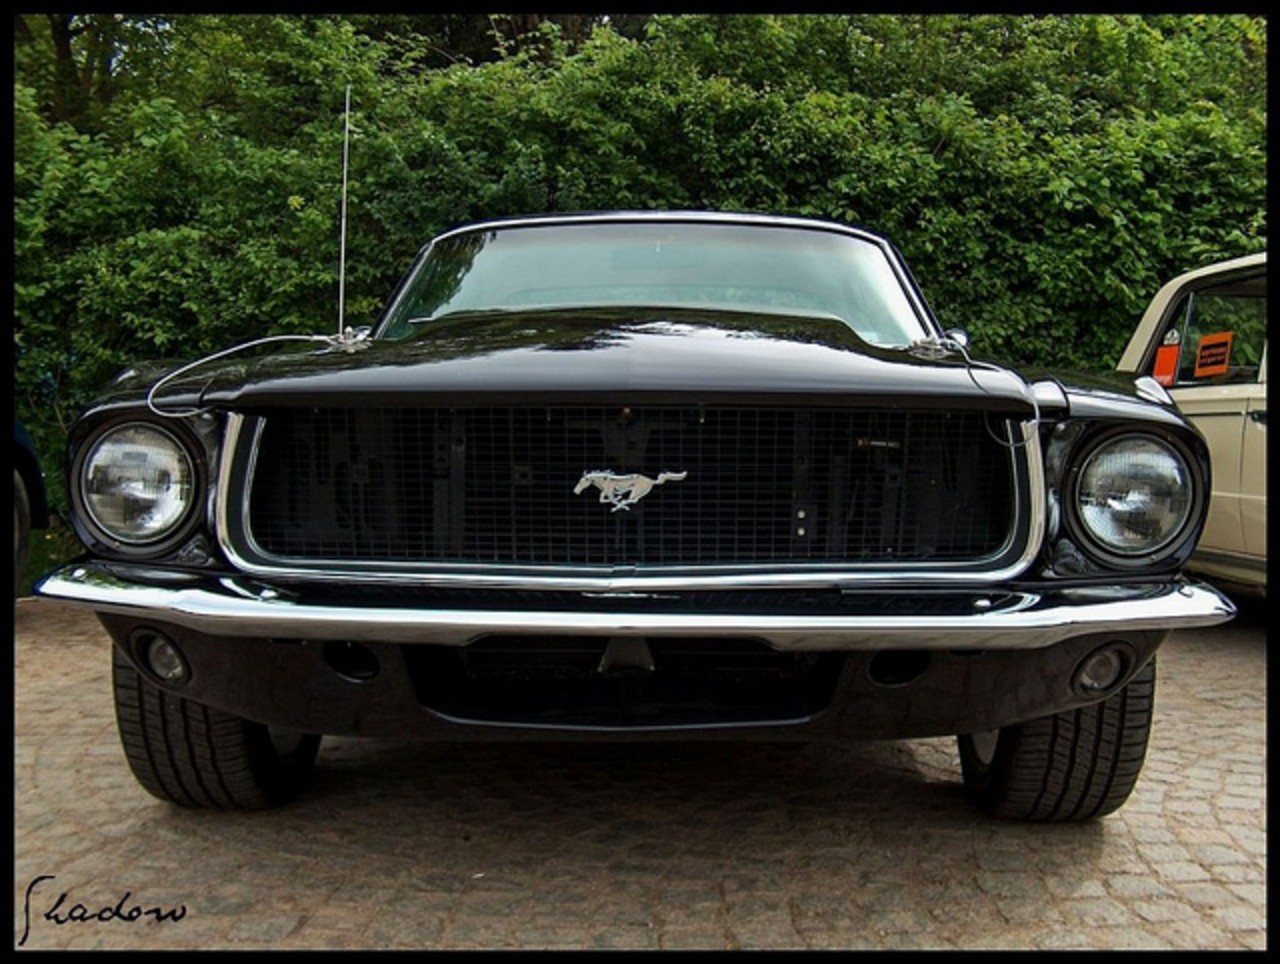 FORD MUSTANG FASTBACK | Flickr - Photo Sharing!